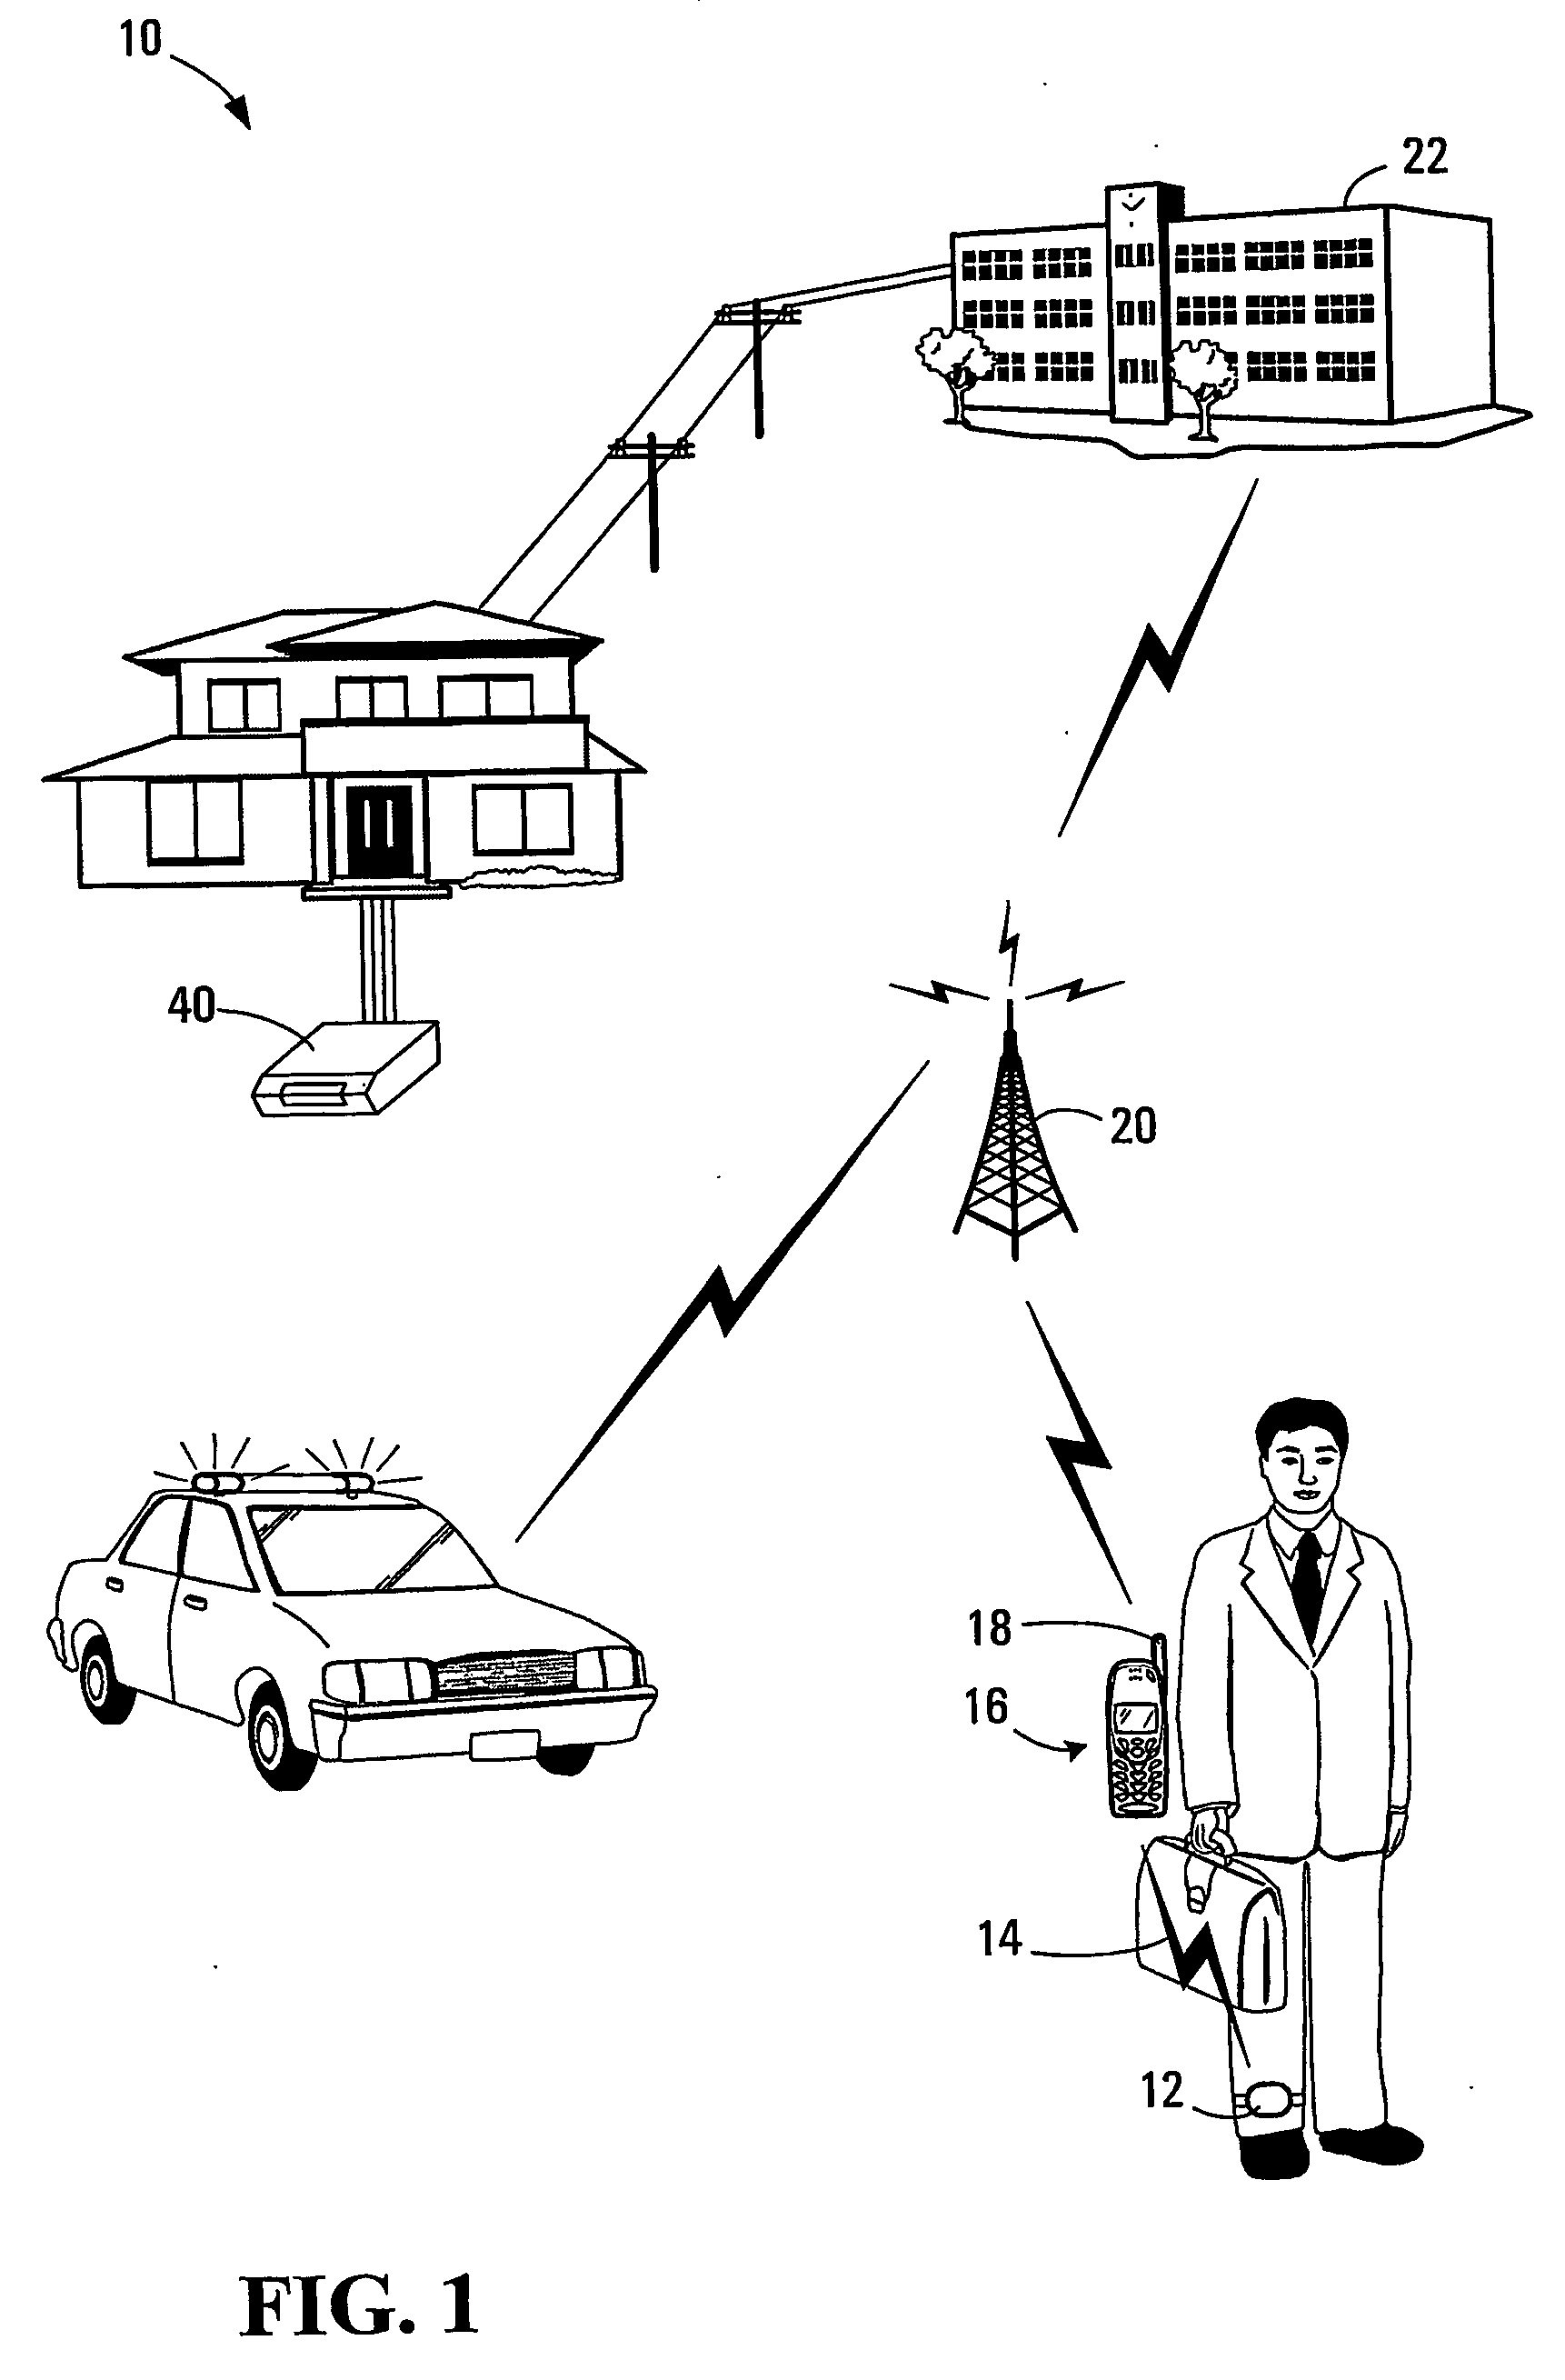 Electronic location monitoring system